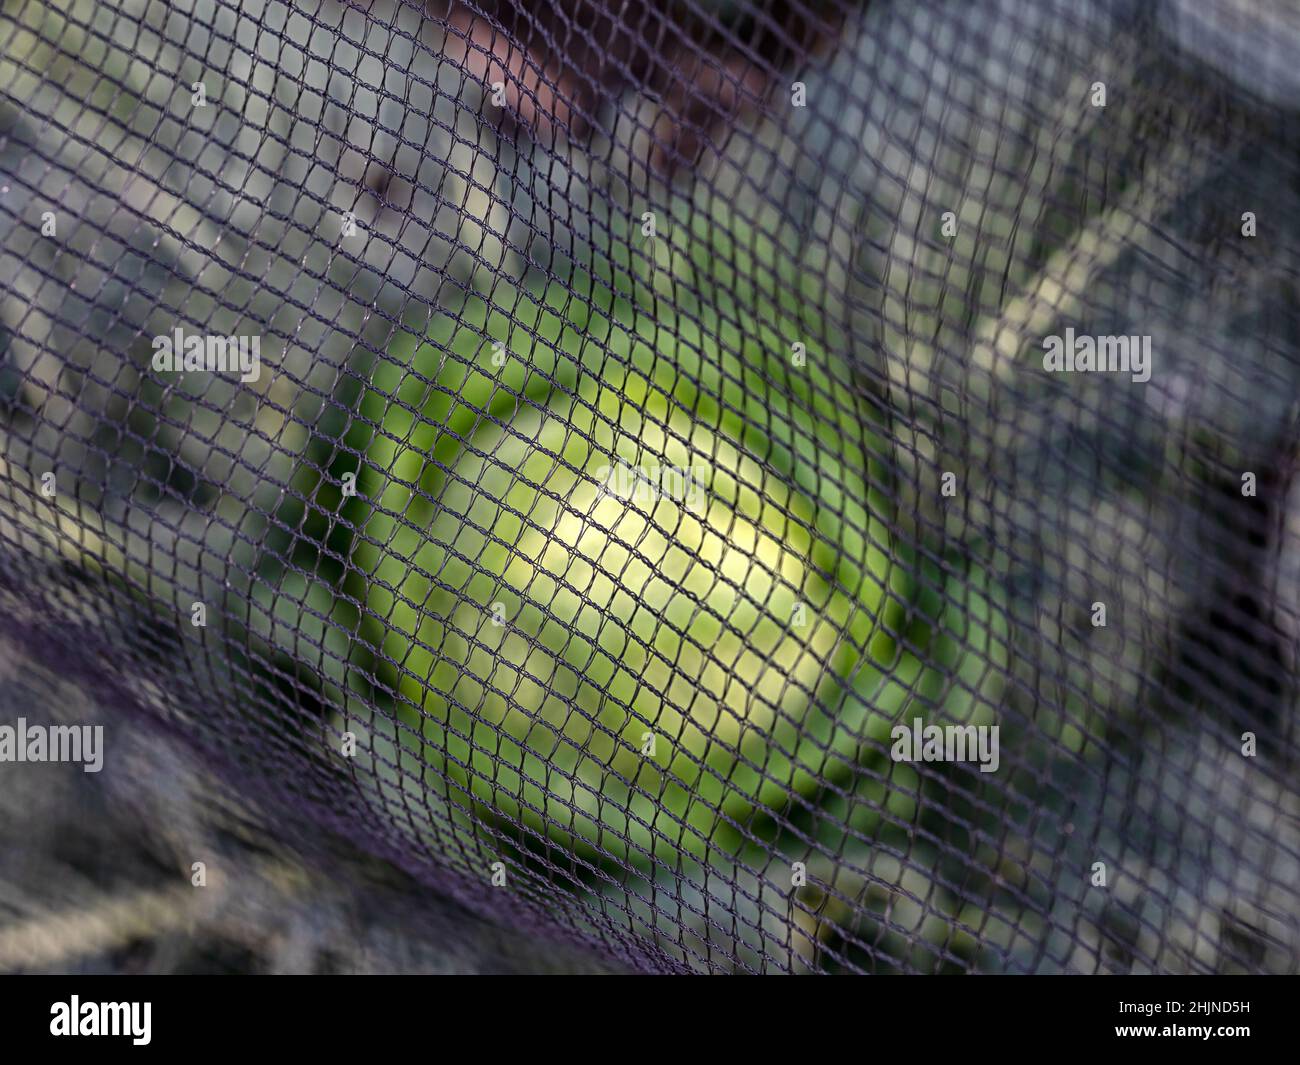 Closeup of garden netting protecting  crops in a vegetable garden from pests and birds Stock Photo